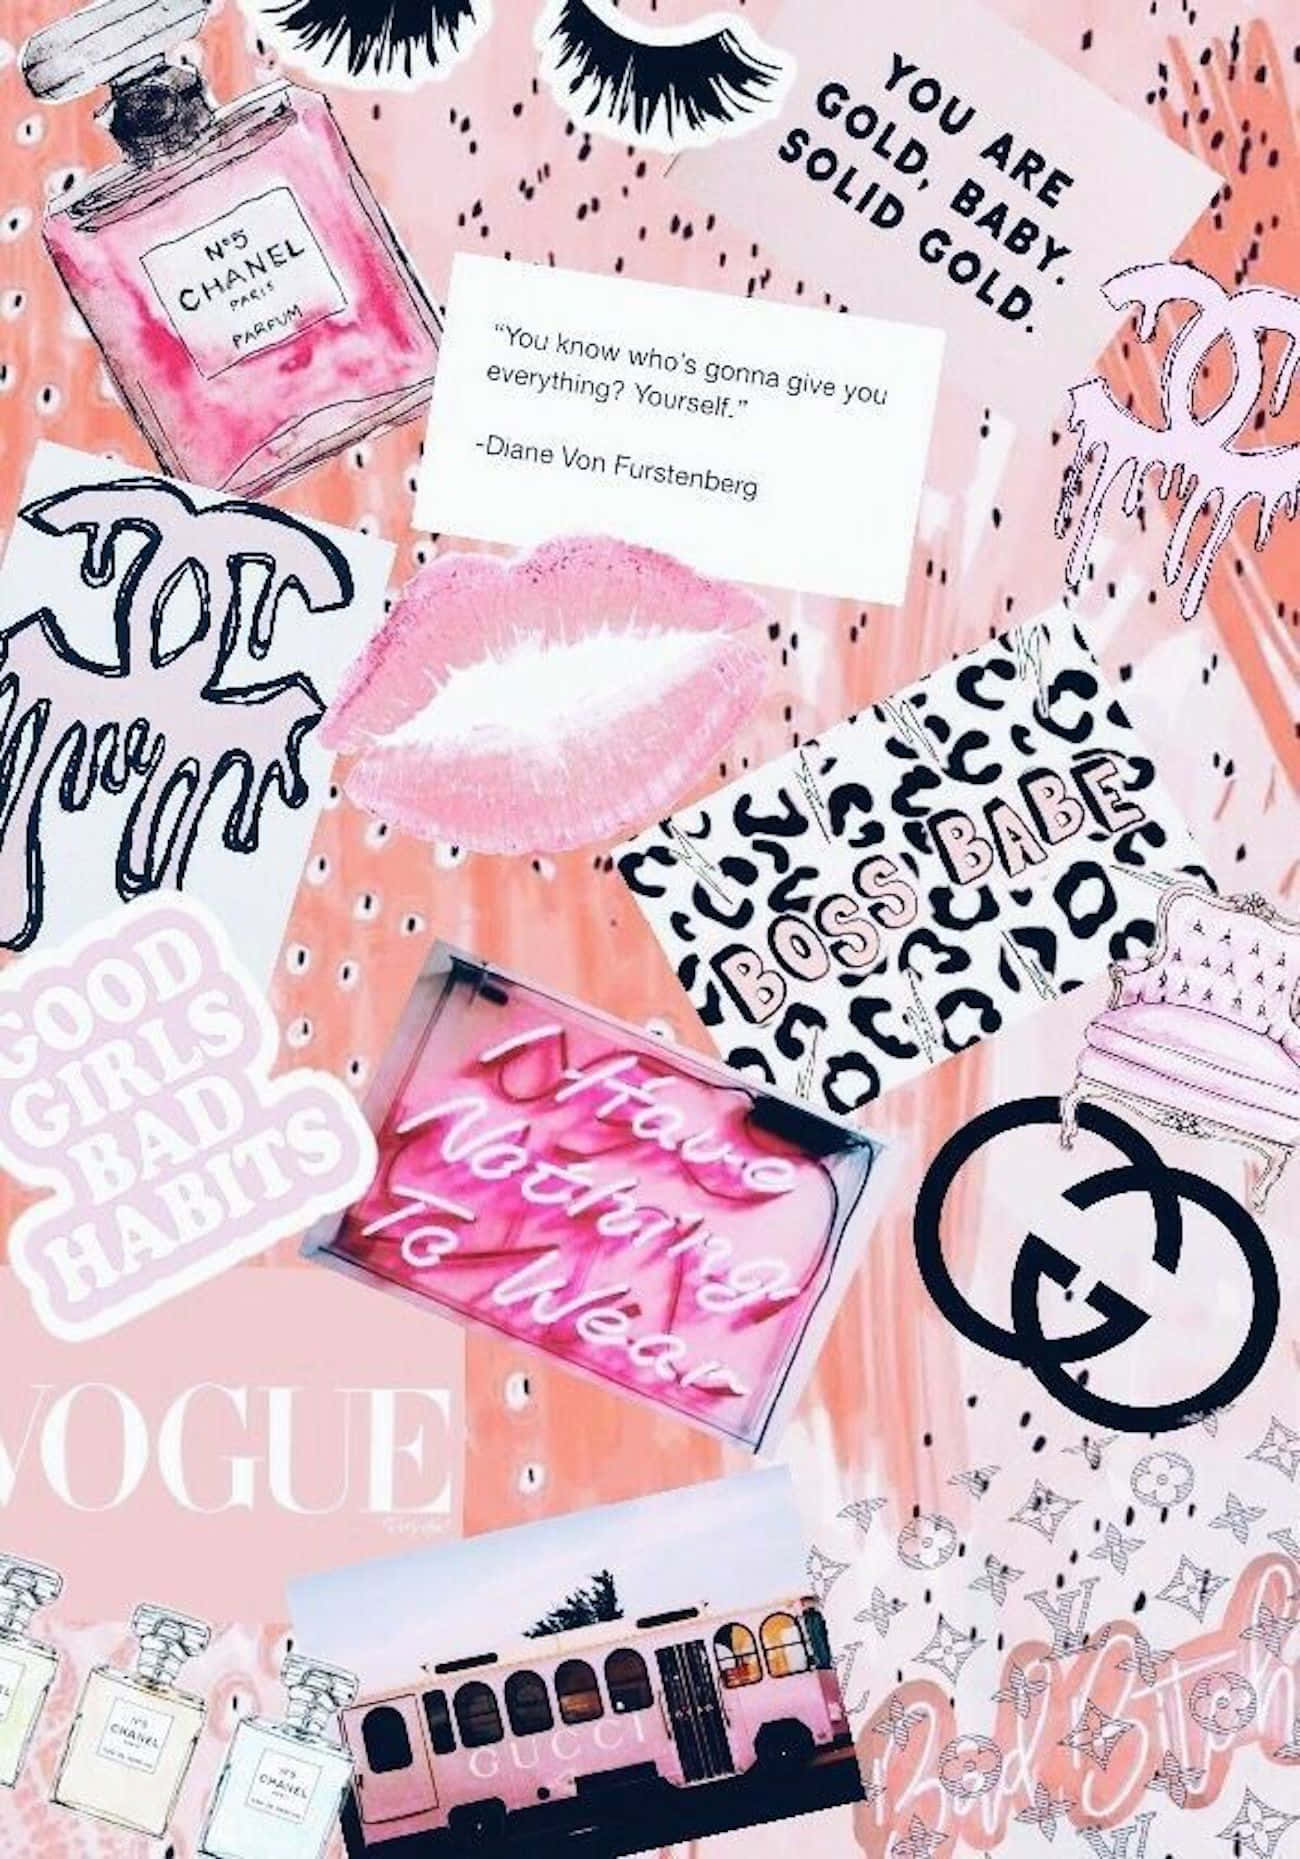 Aesthetic Pink Collage Brand Logos And Girly Stuff Background